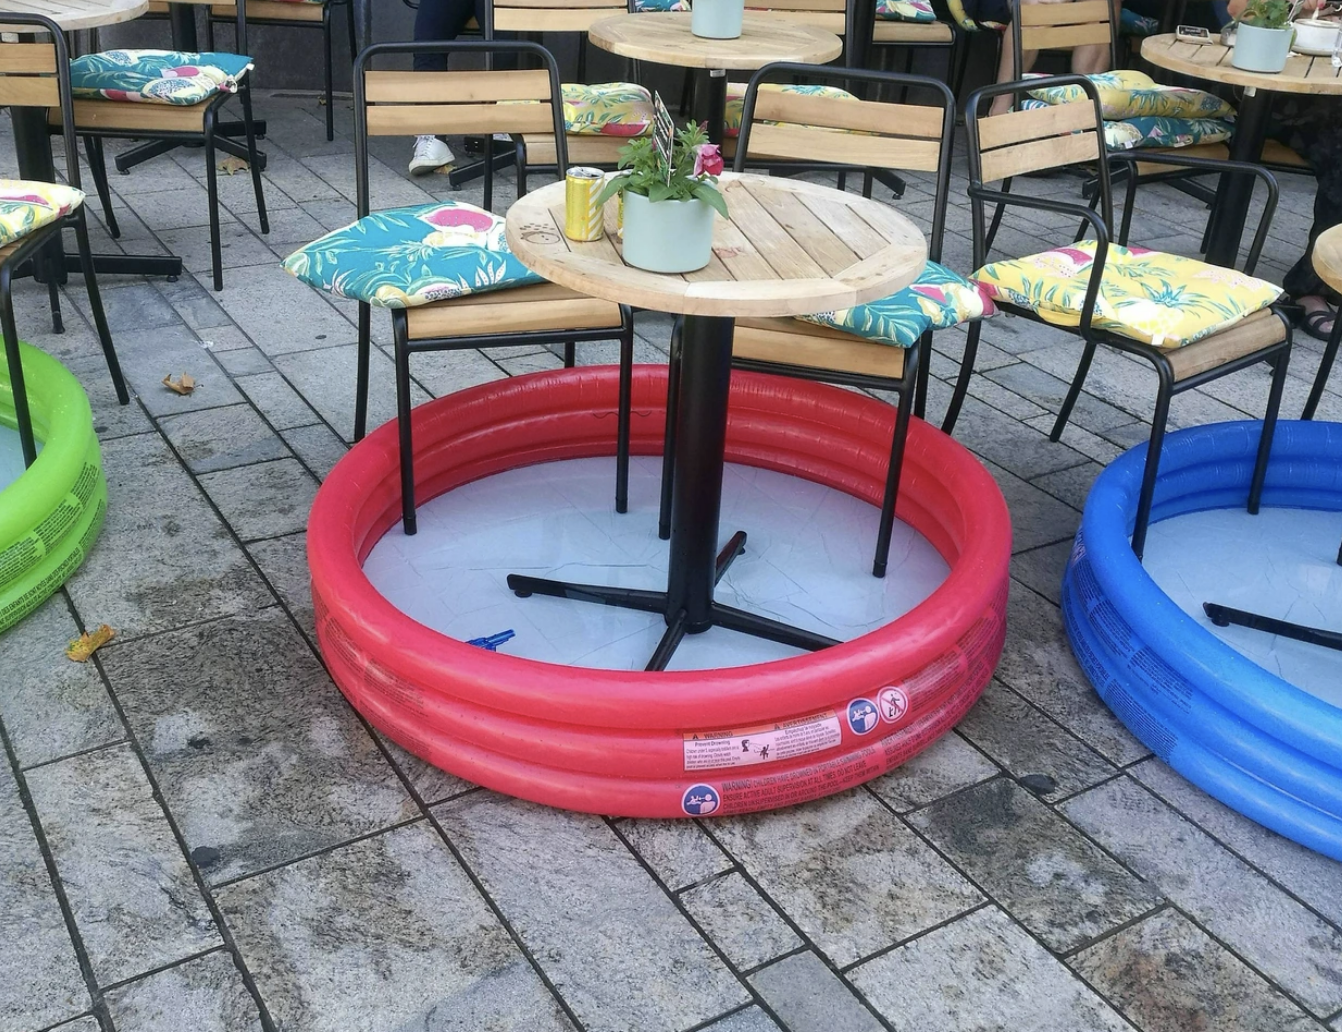 Outdoor cafe tables set in large inflatable pools for physical distancing